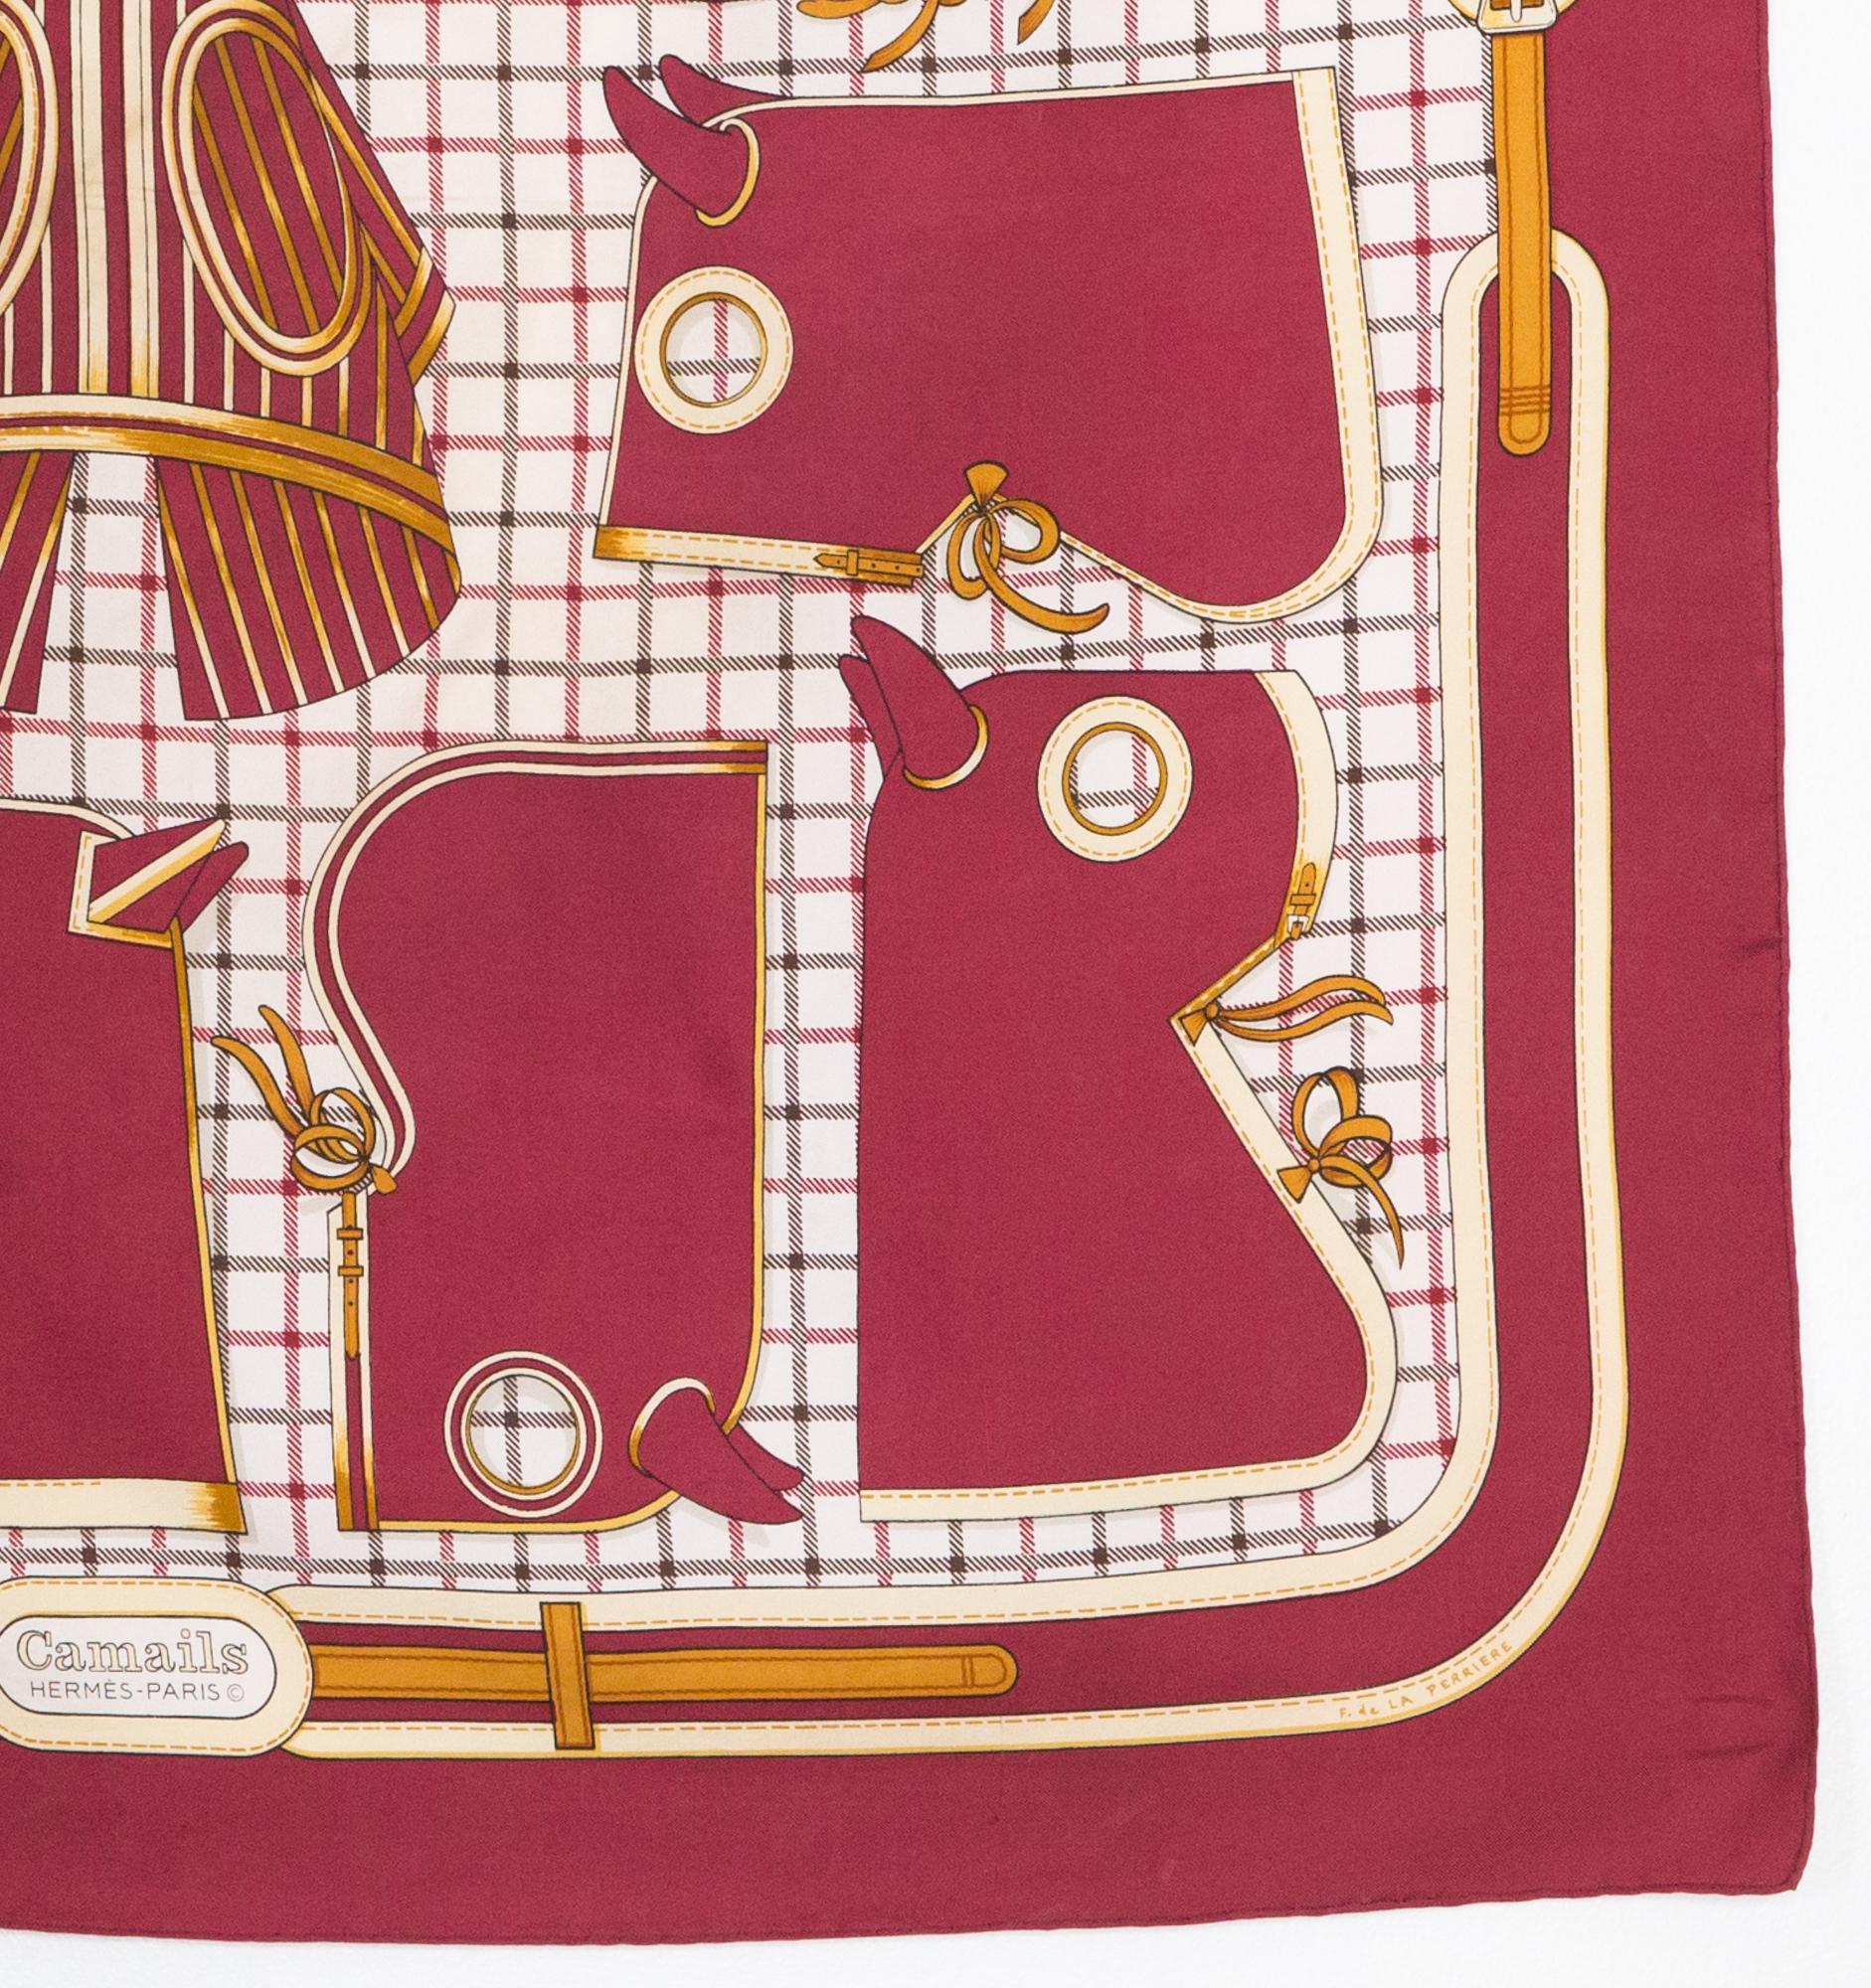 1974 Hermes Camails Designed by F. de la Perriere Silk Scarf In Good Condition For Sale In Paris, FR